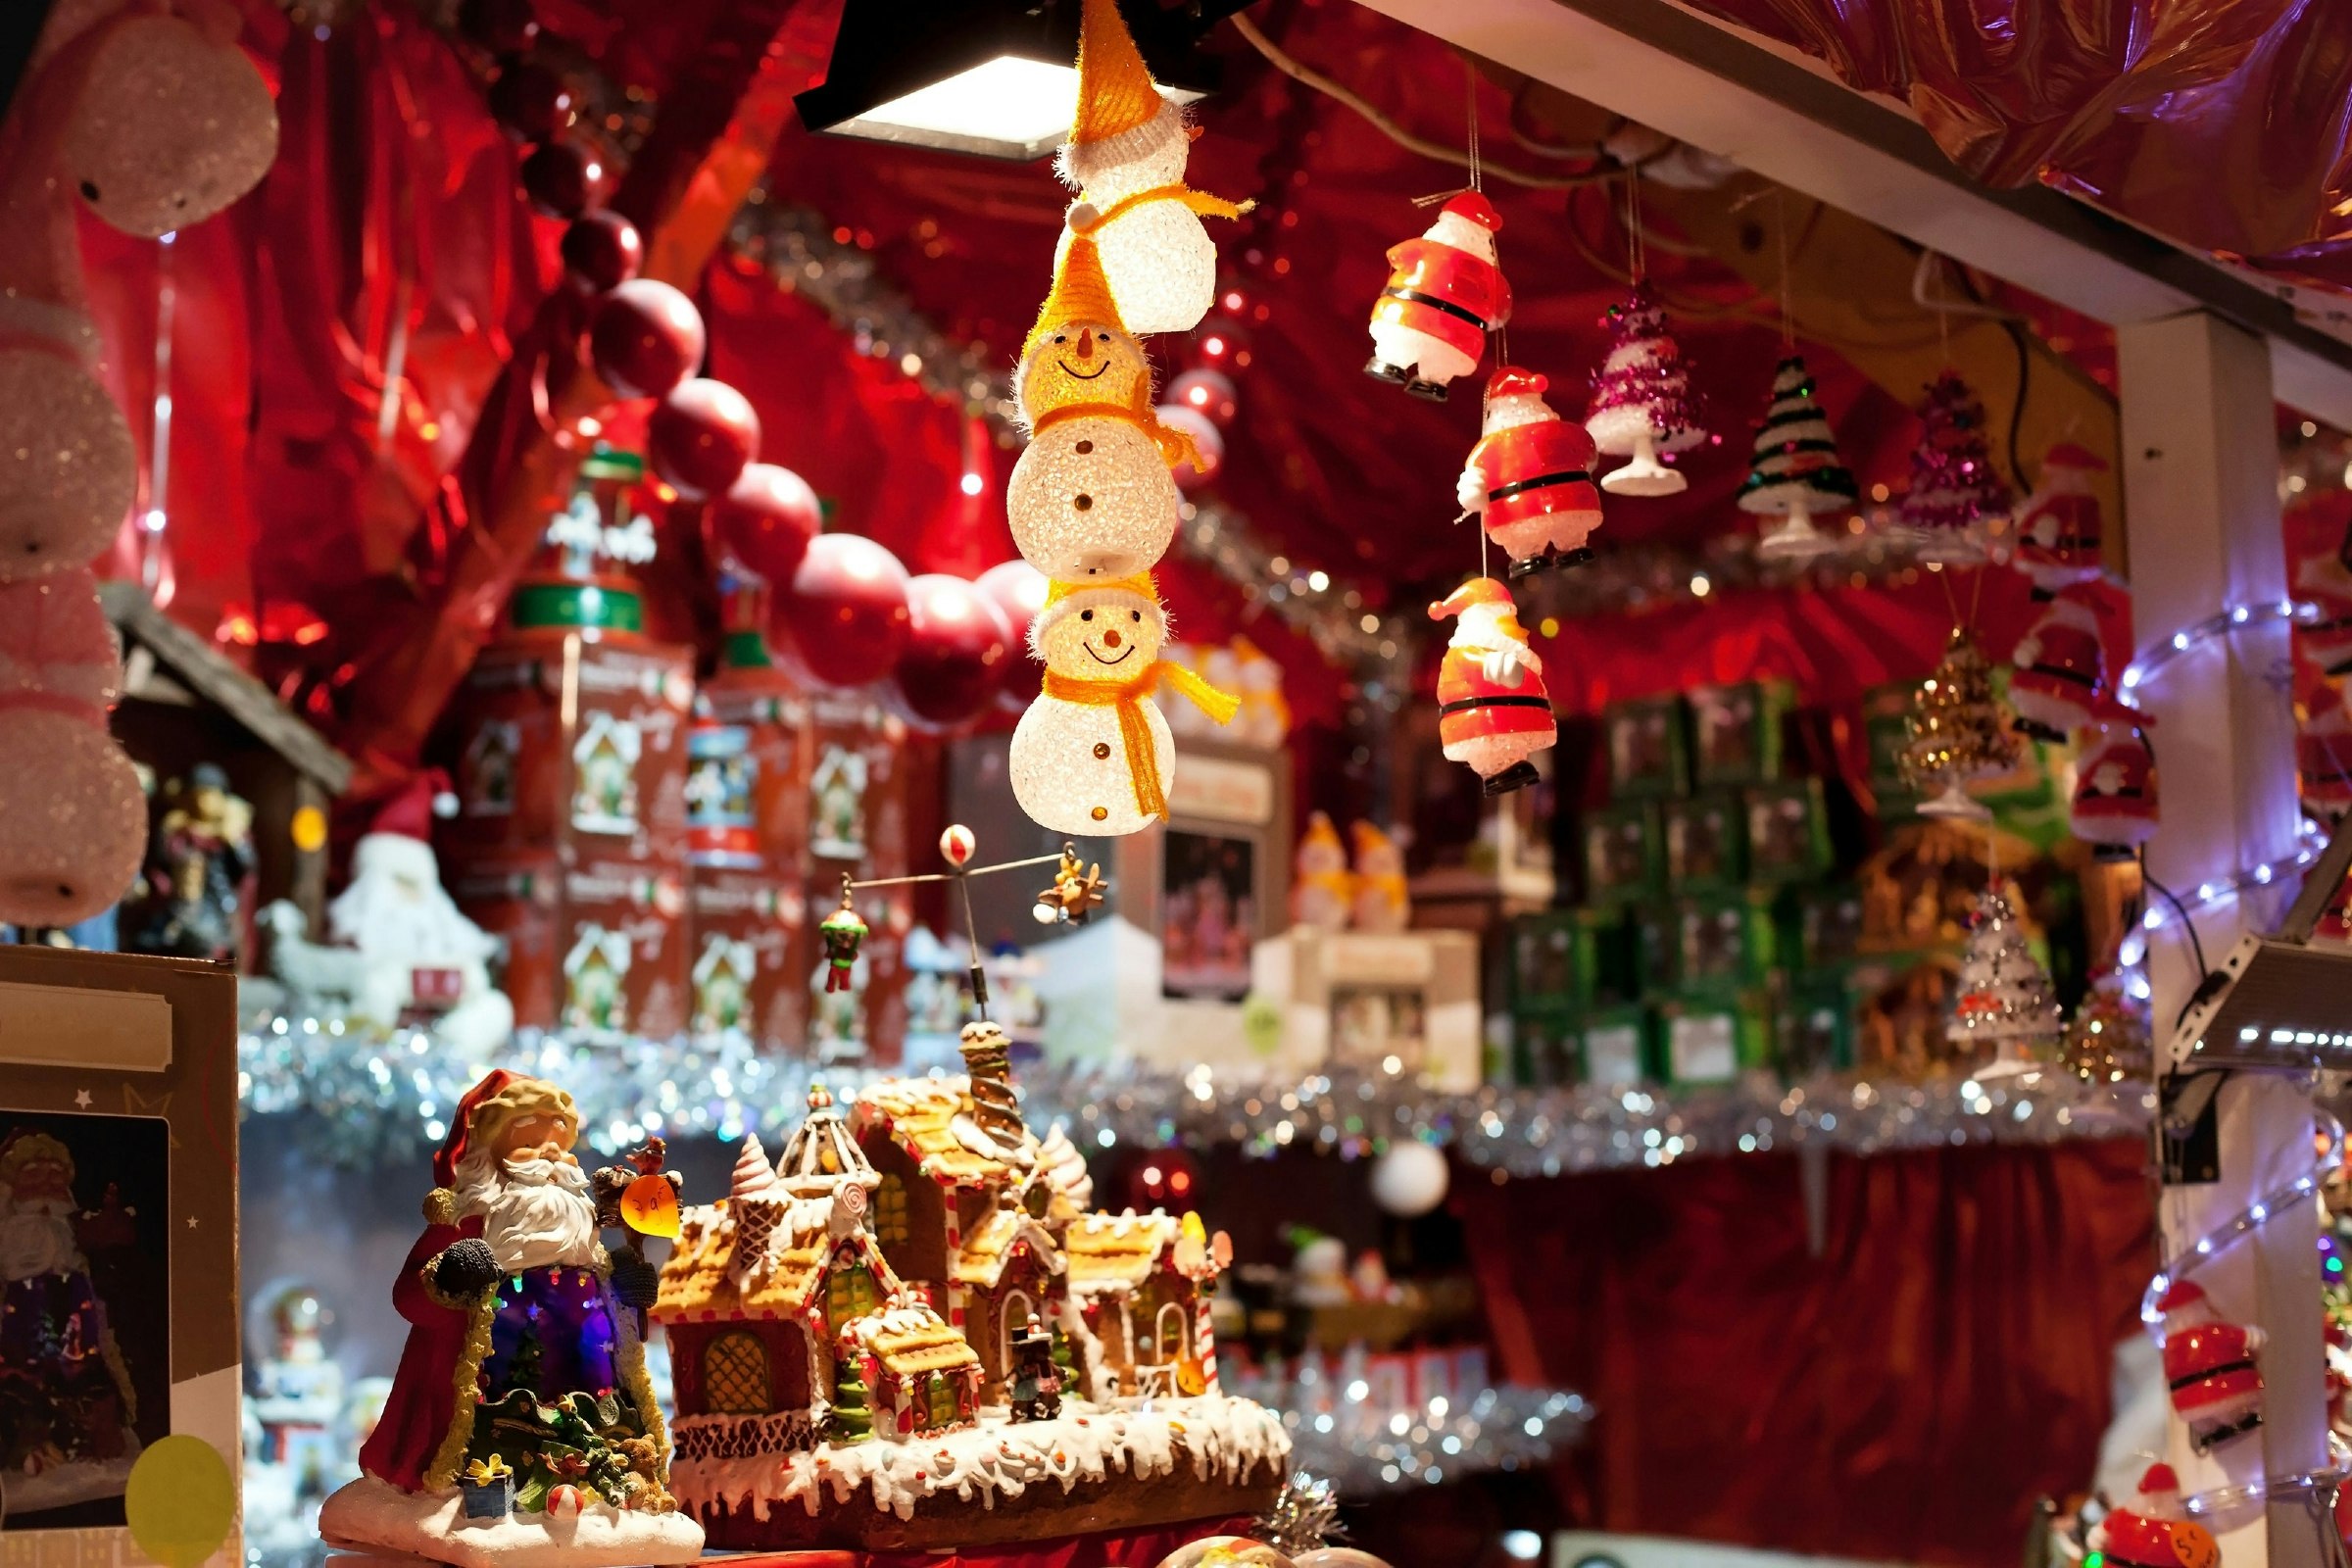 A stall of decorations, including a light-up snowman hanging from the roof and a manger.